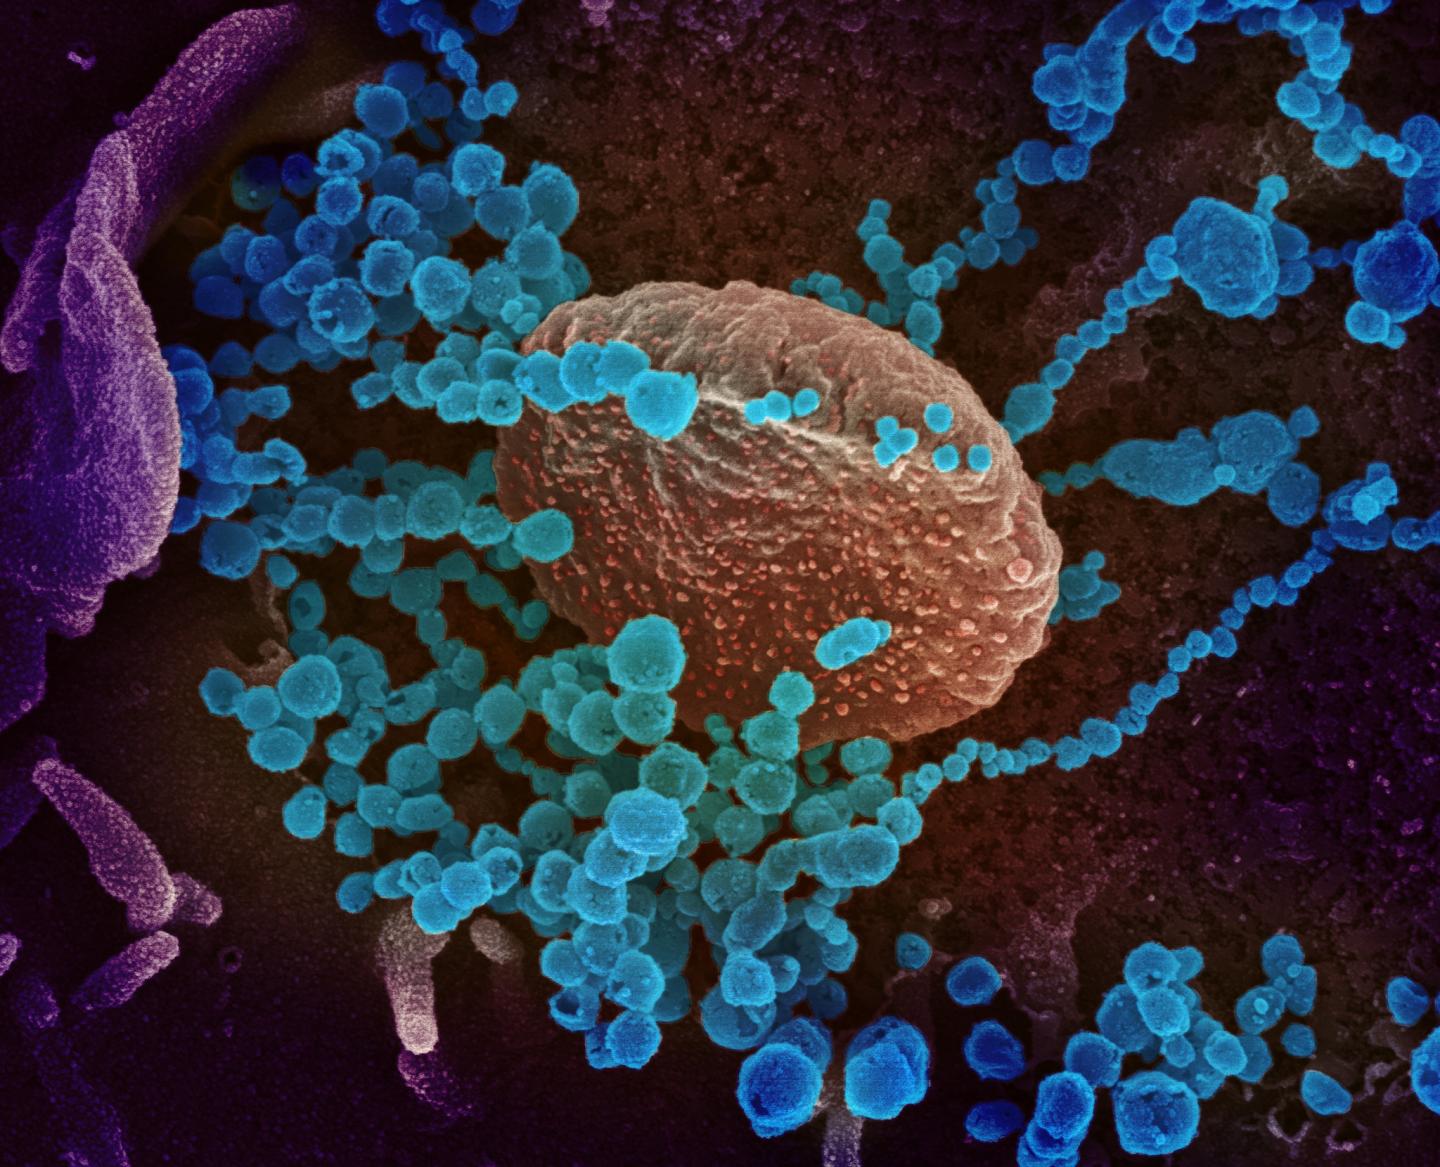 Scanning electron microscope image shows SARS-CoV-2 (round blue objects), the virus that causes COVID-19, emerging from the surface of cells cultured in the lab